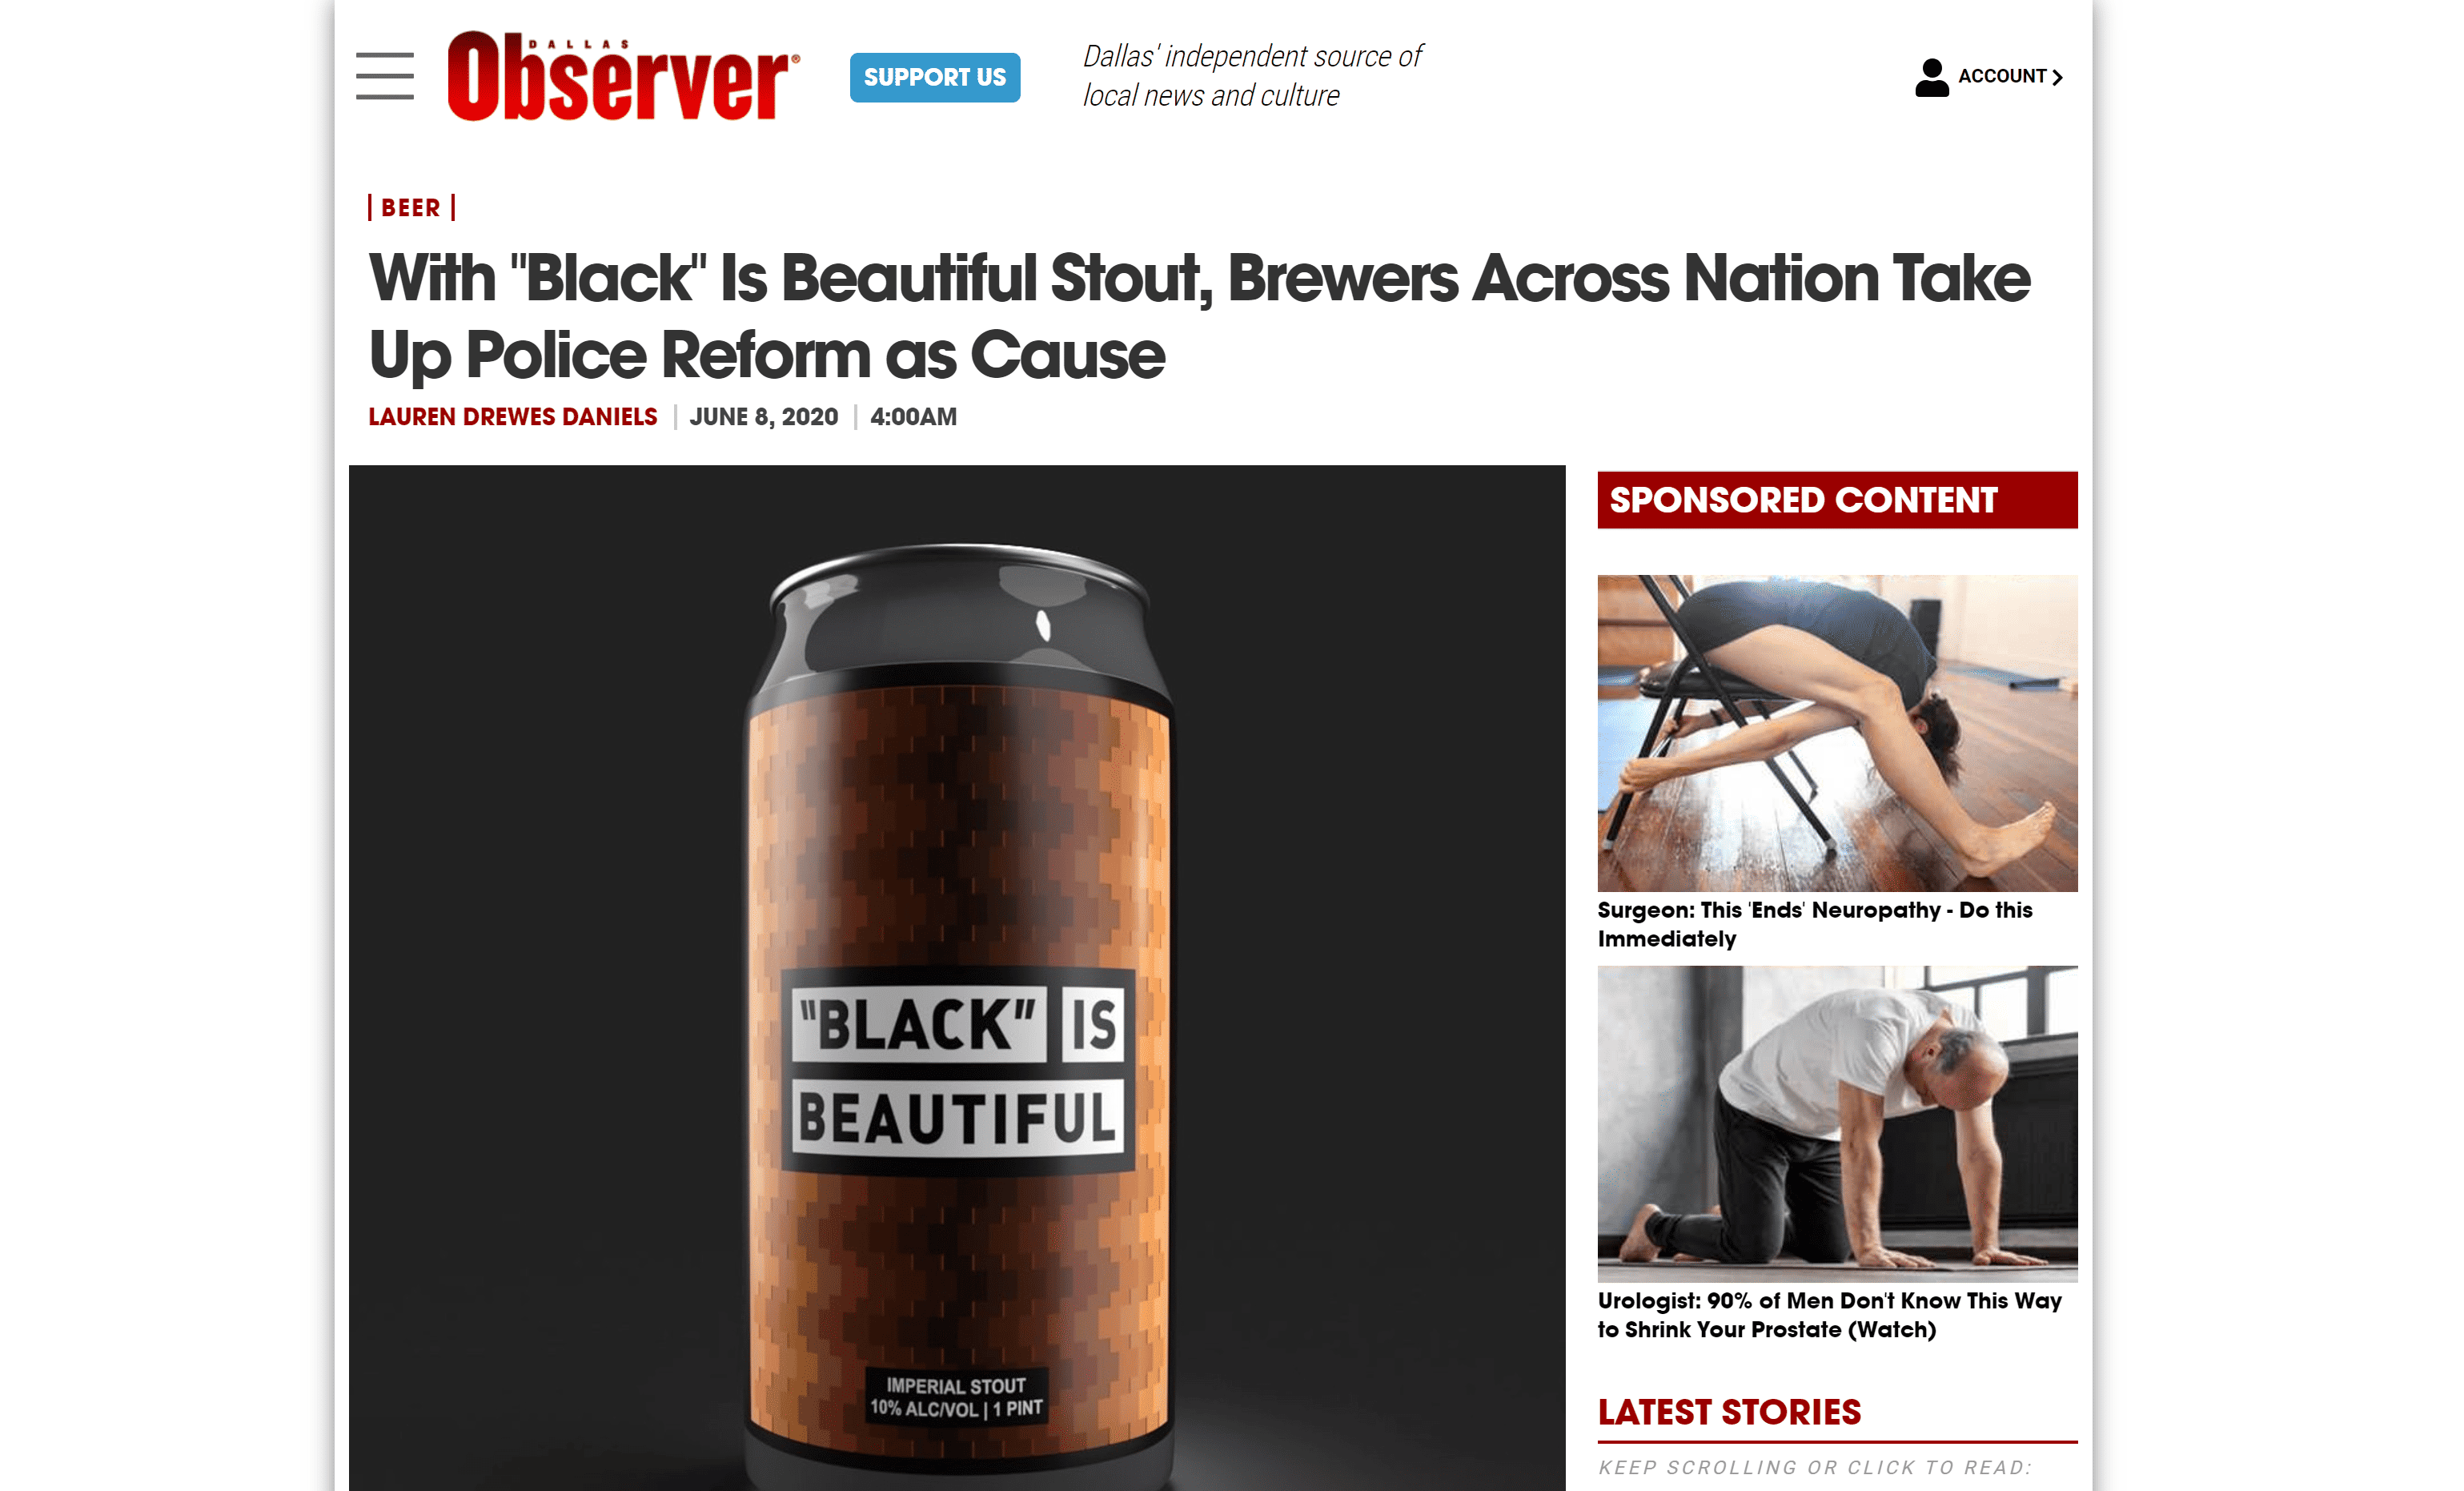 Brewers take up Black is Beautiful campaign in Dallas Observer